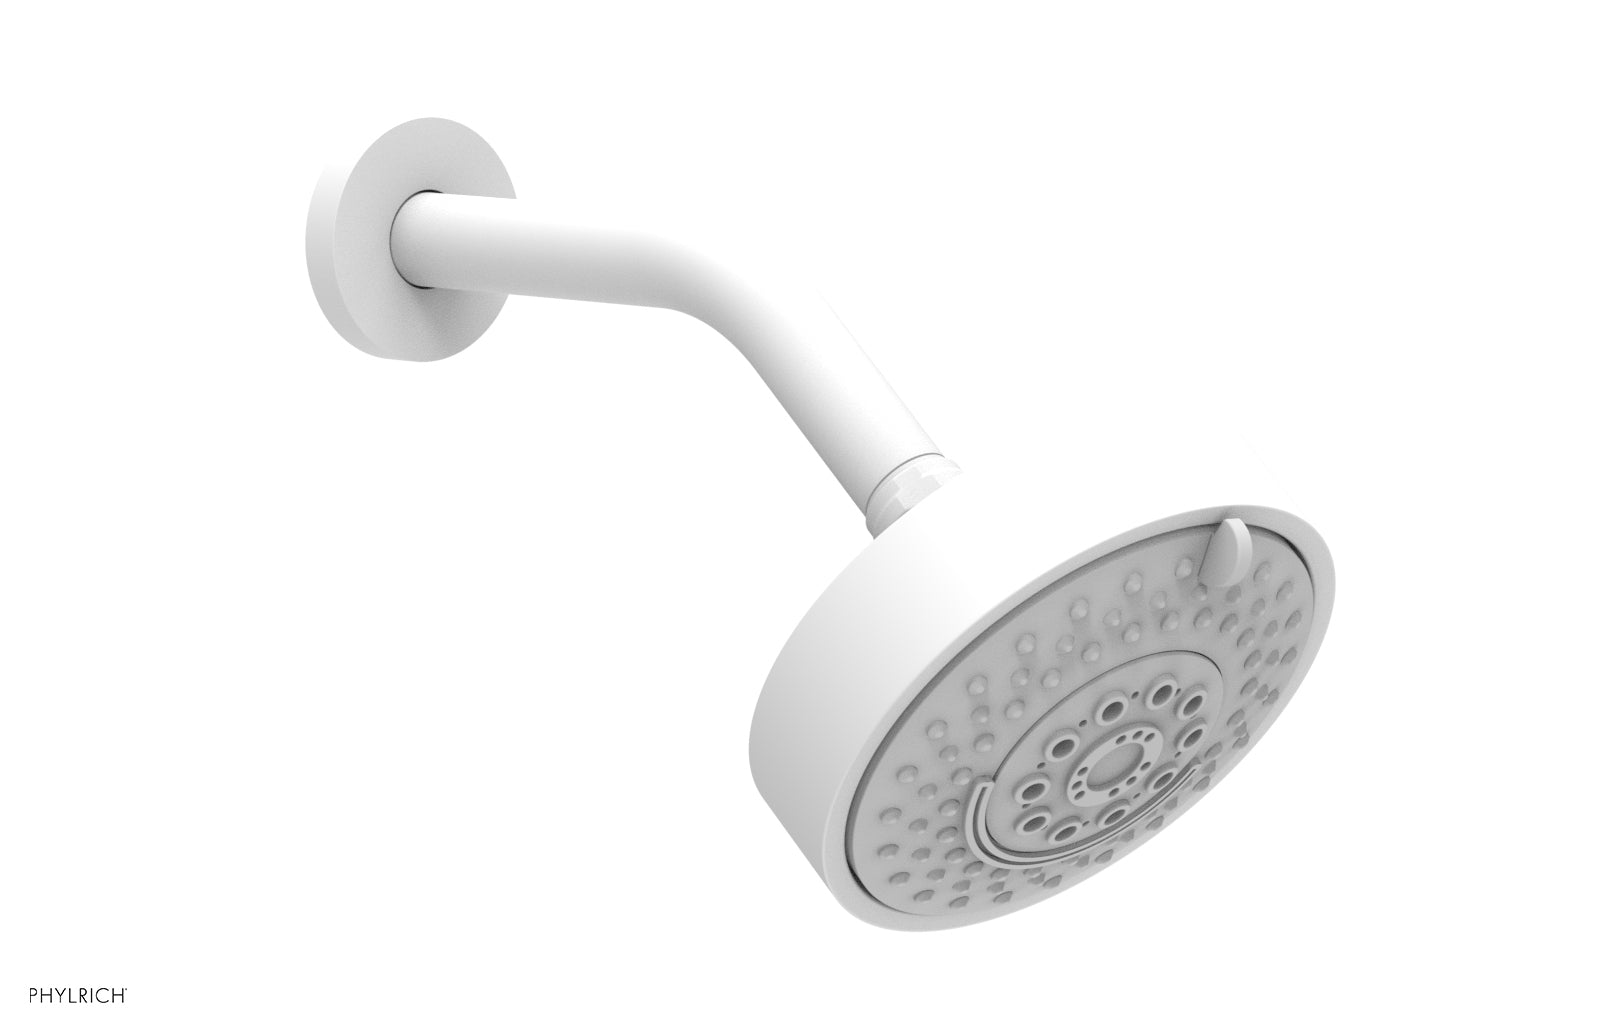 Phylrich 5" Contemporary Shower Head - 4 Functions